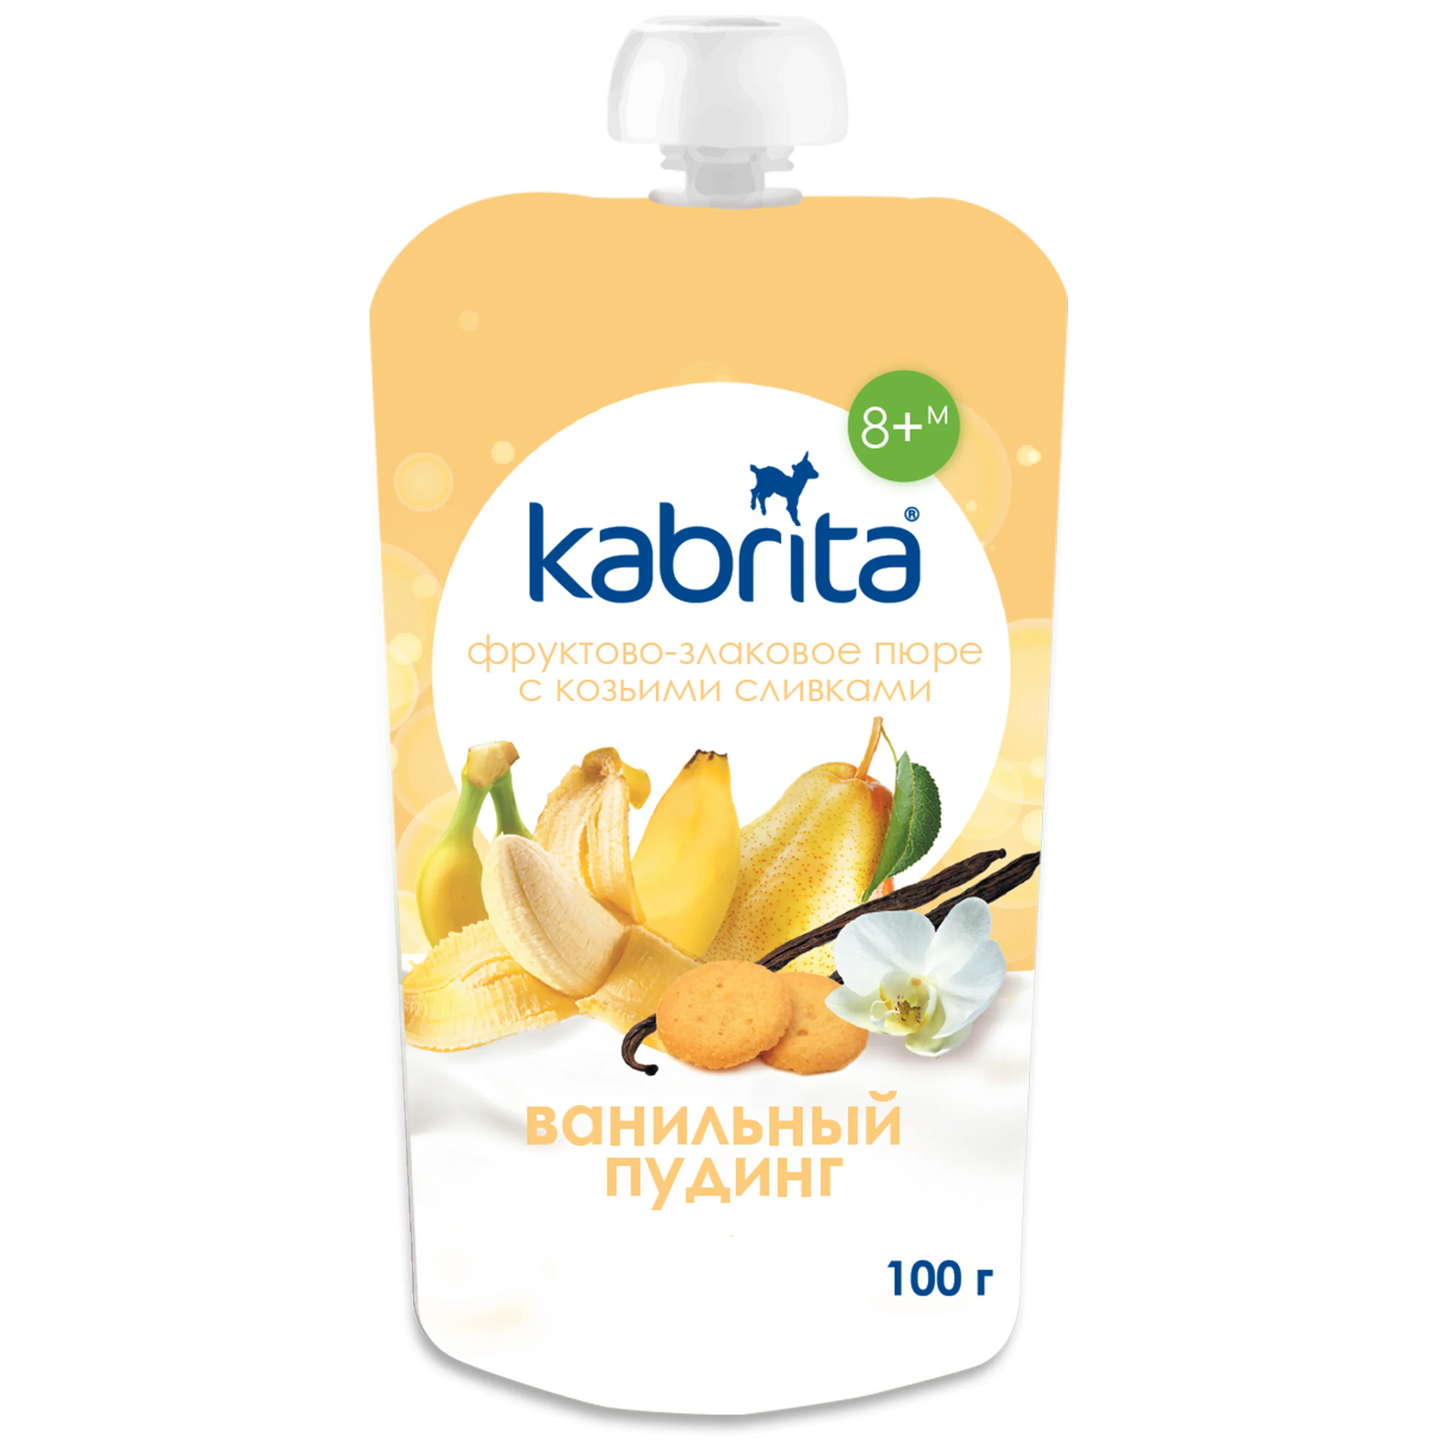 Kabrita Vanilla Pudding With Fruit, Cereal And Goat Cream 100 G - 6 Pouches - Emmbaby Canada